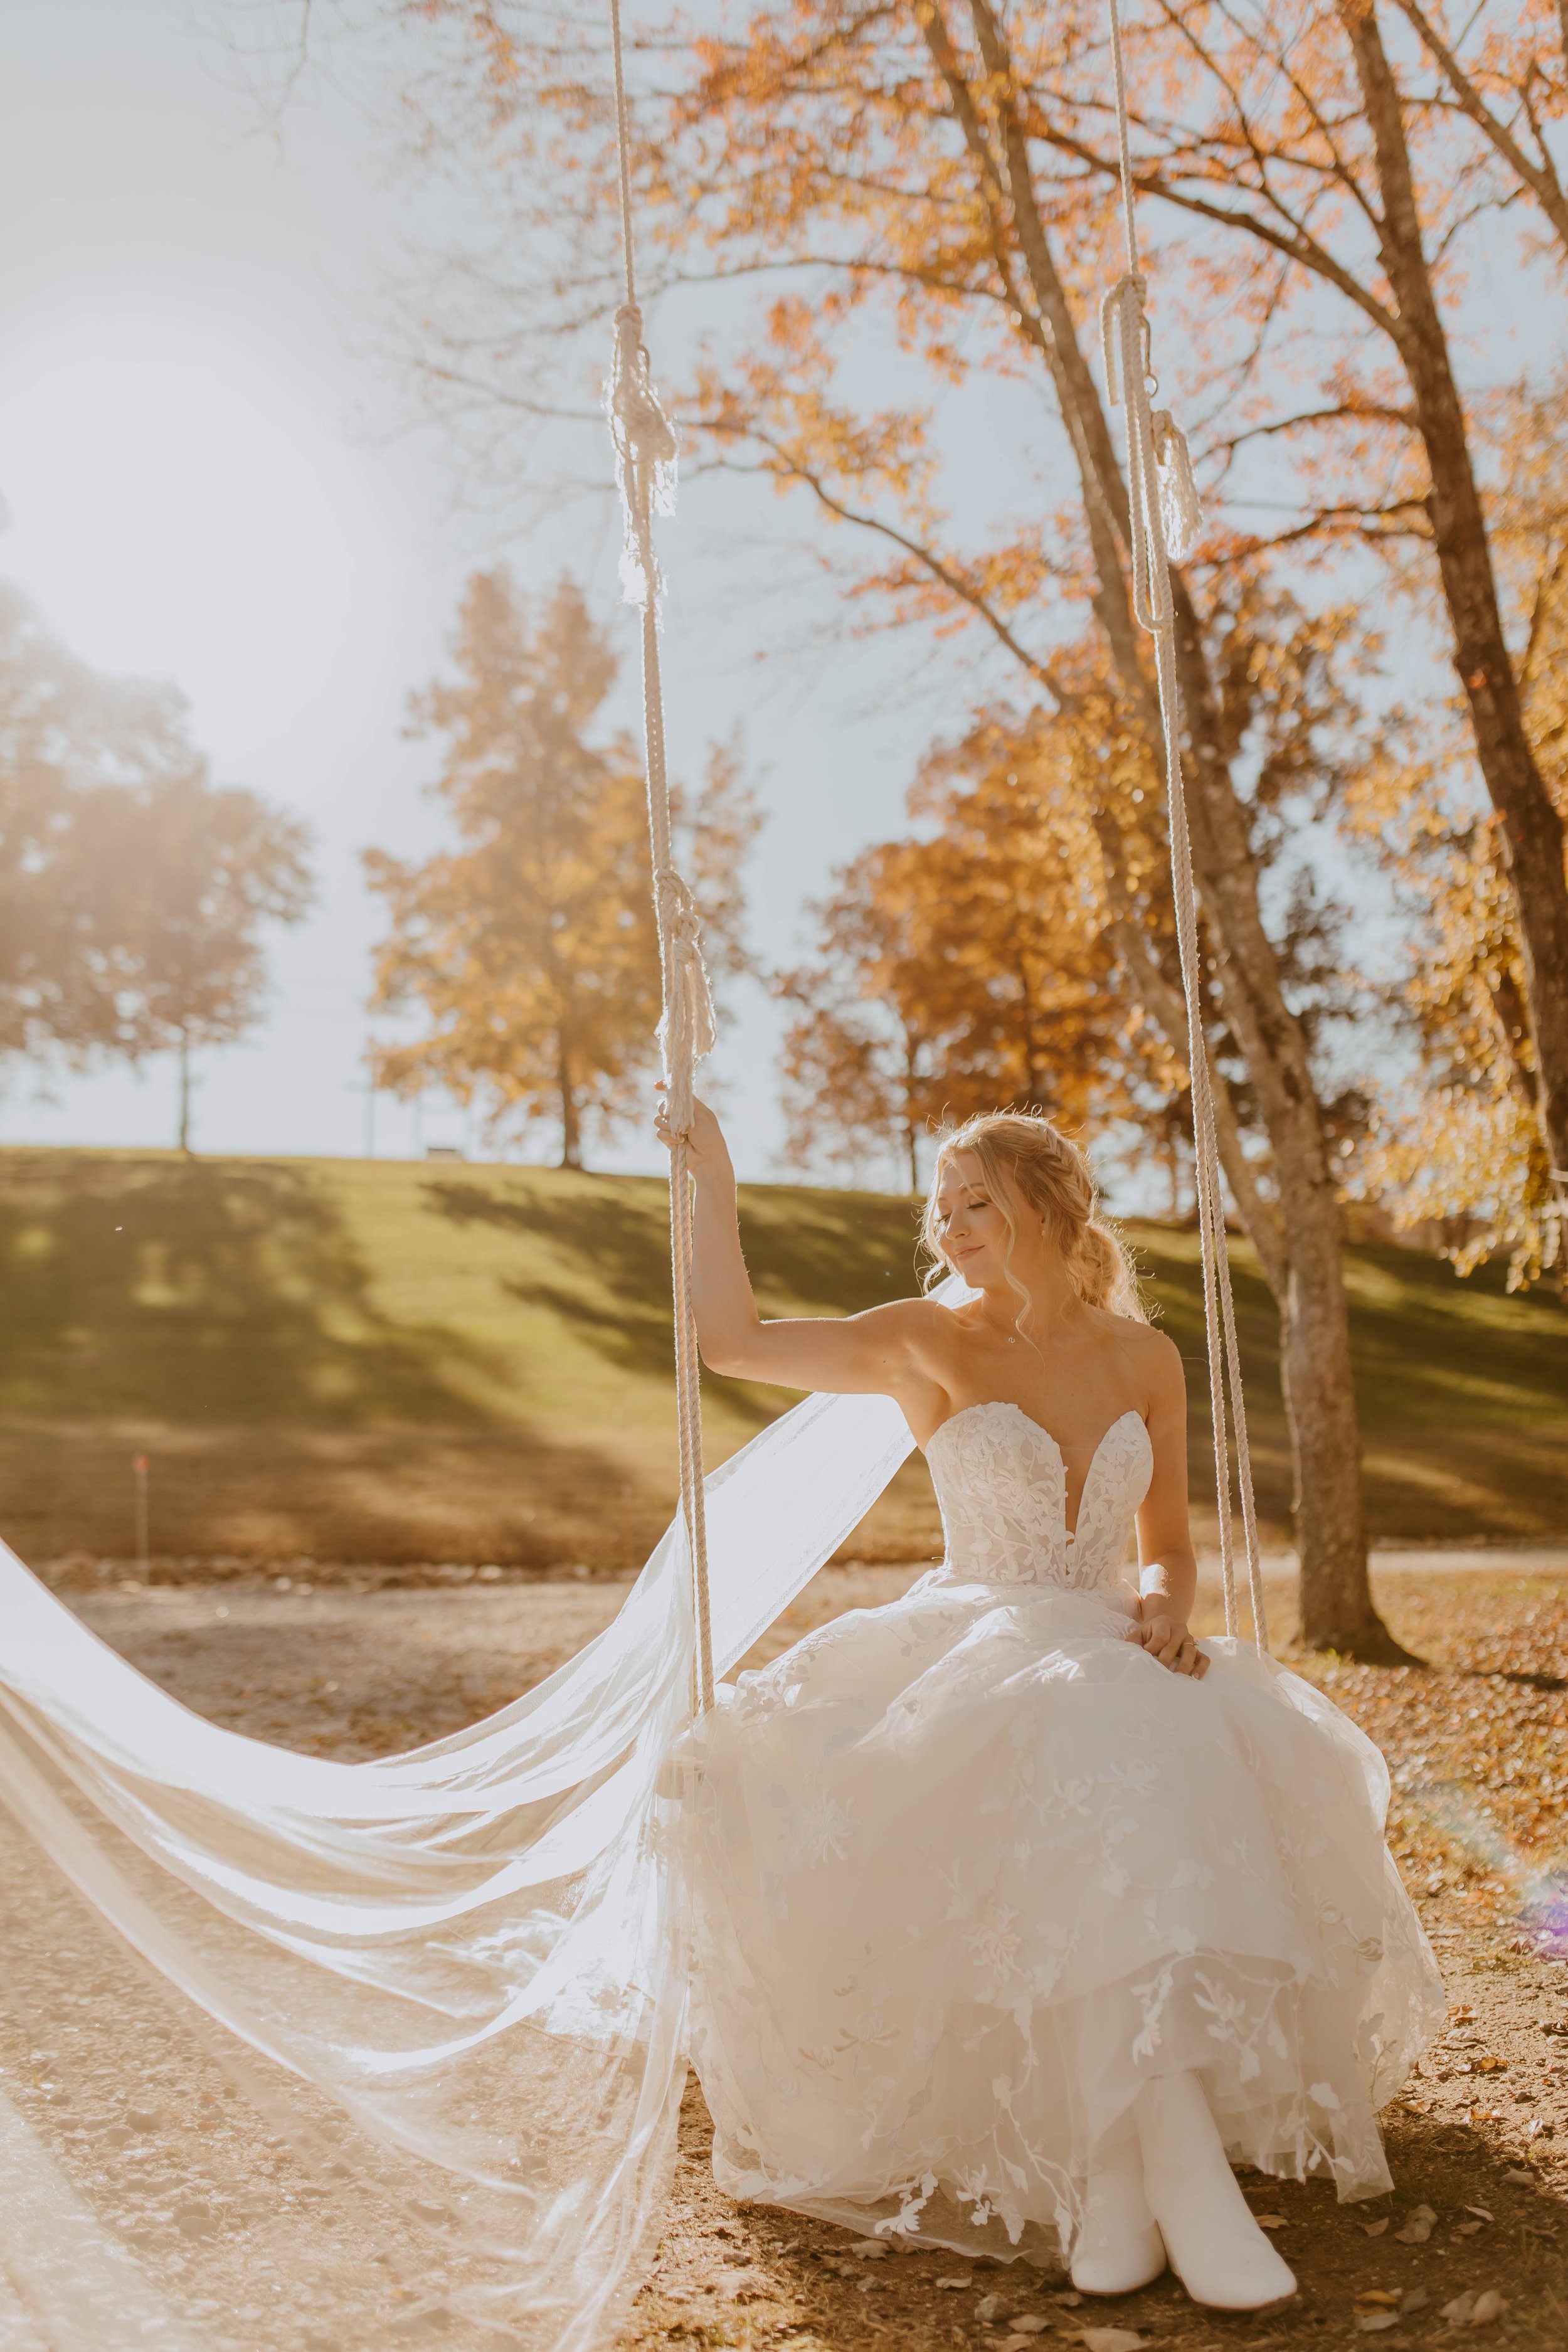 Bride on swing with beautiful fall leaves in the background.